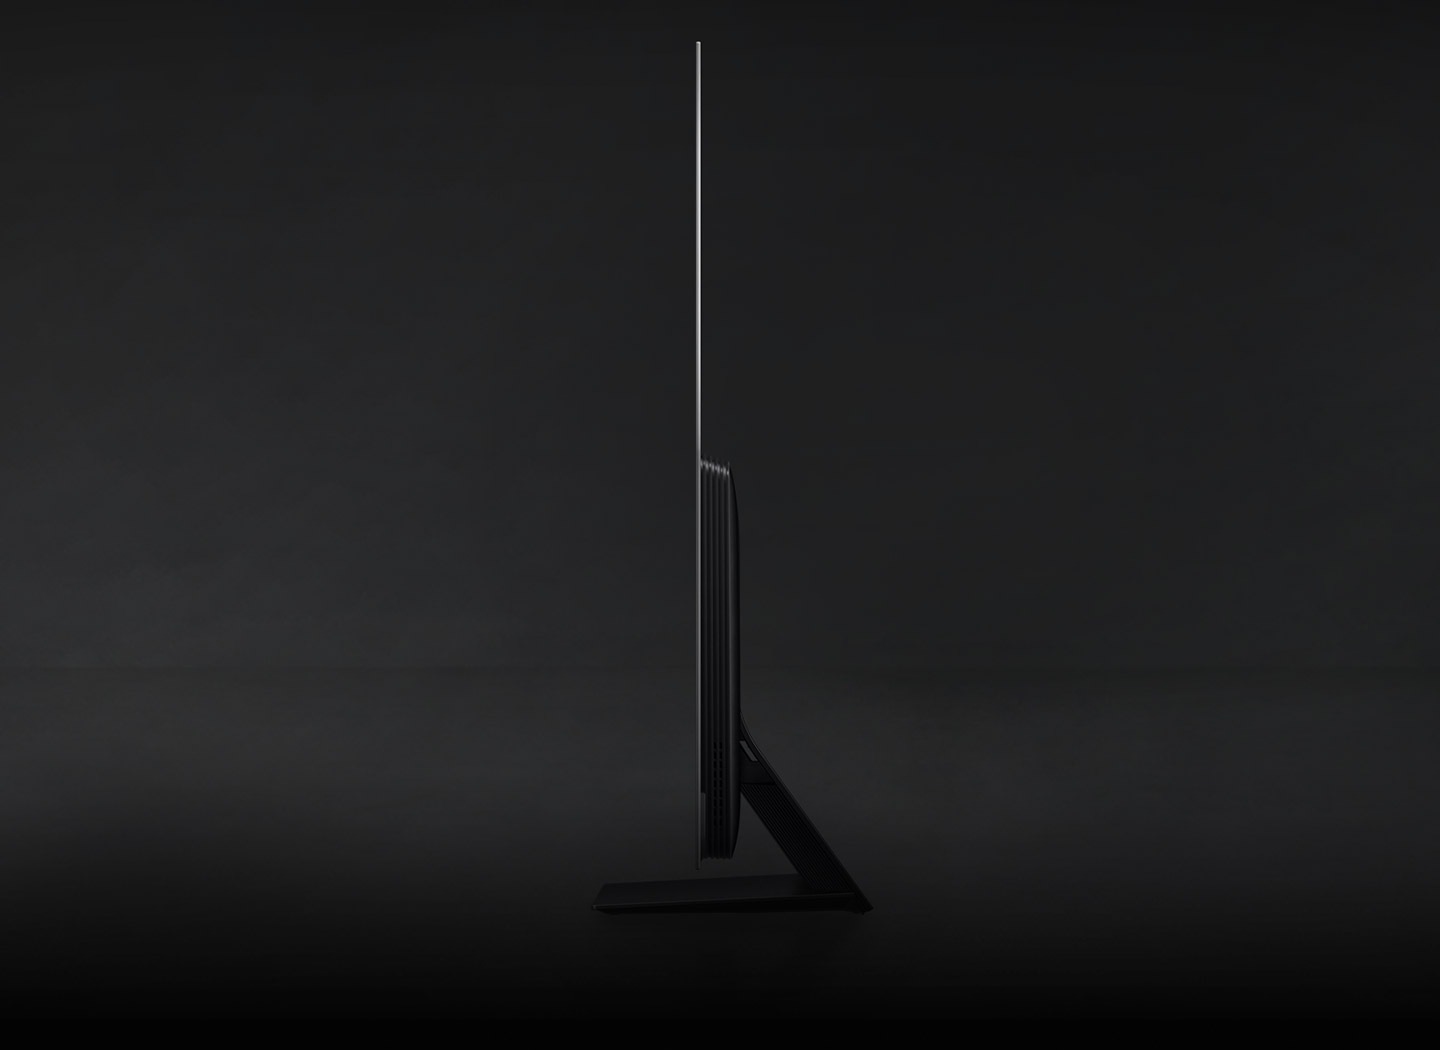 A OLED TV turns sideways to show its laser-slim design from the side.